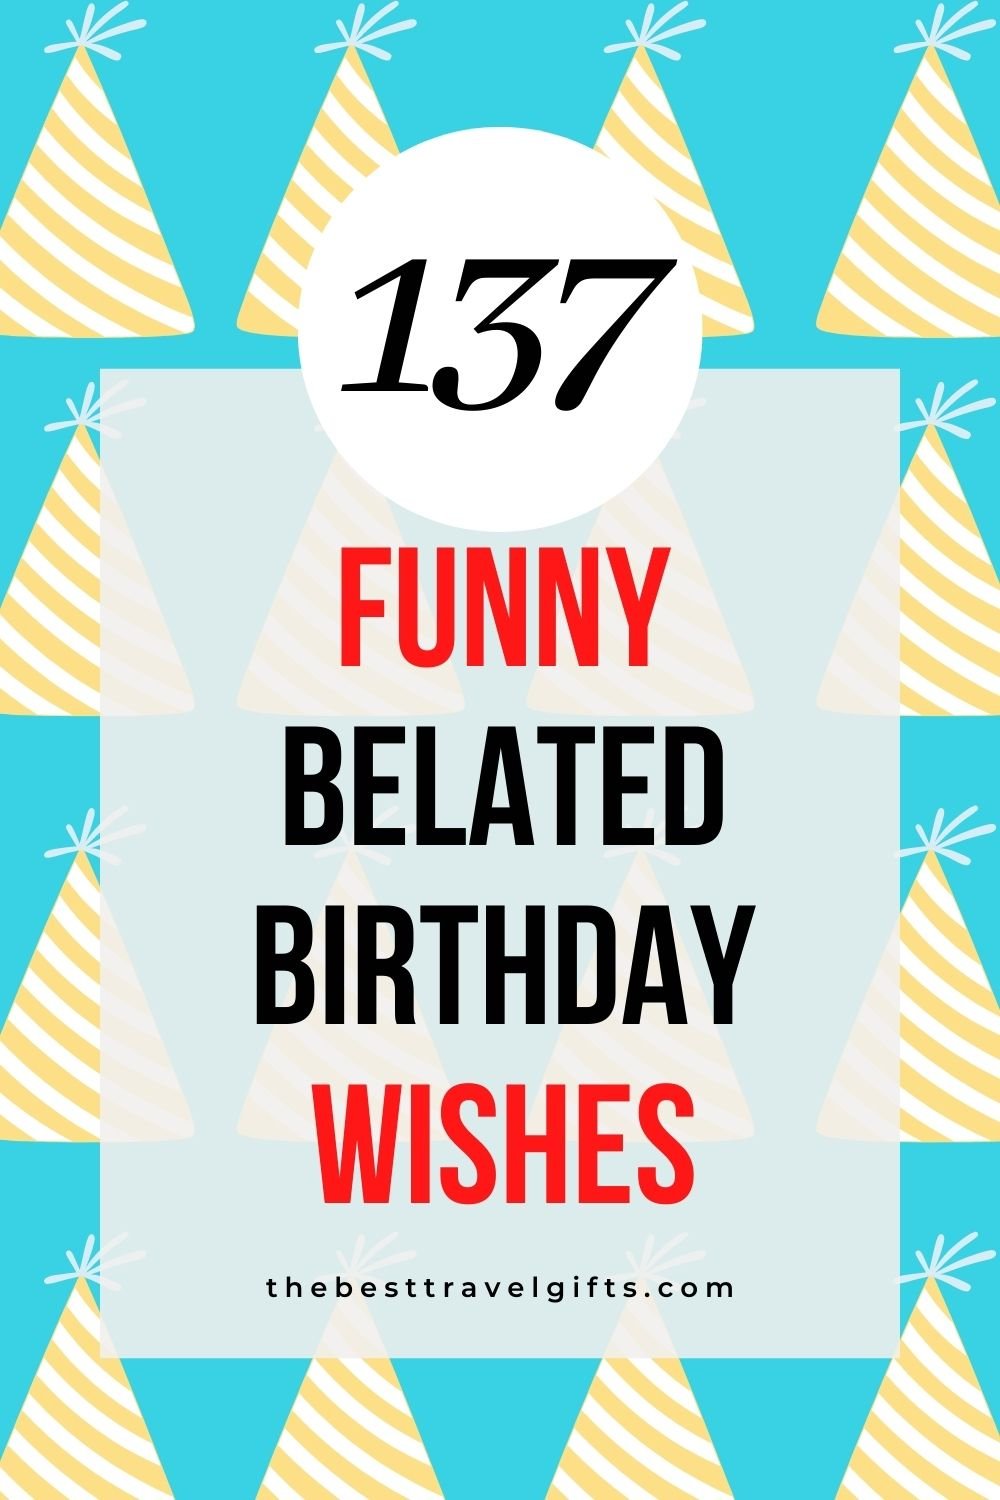 159 Happy Belated Birthday Funny Quotes To Write On A Card